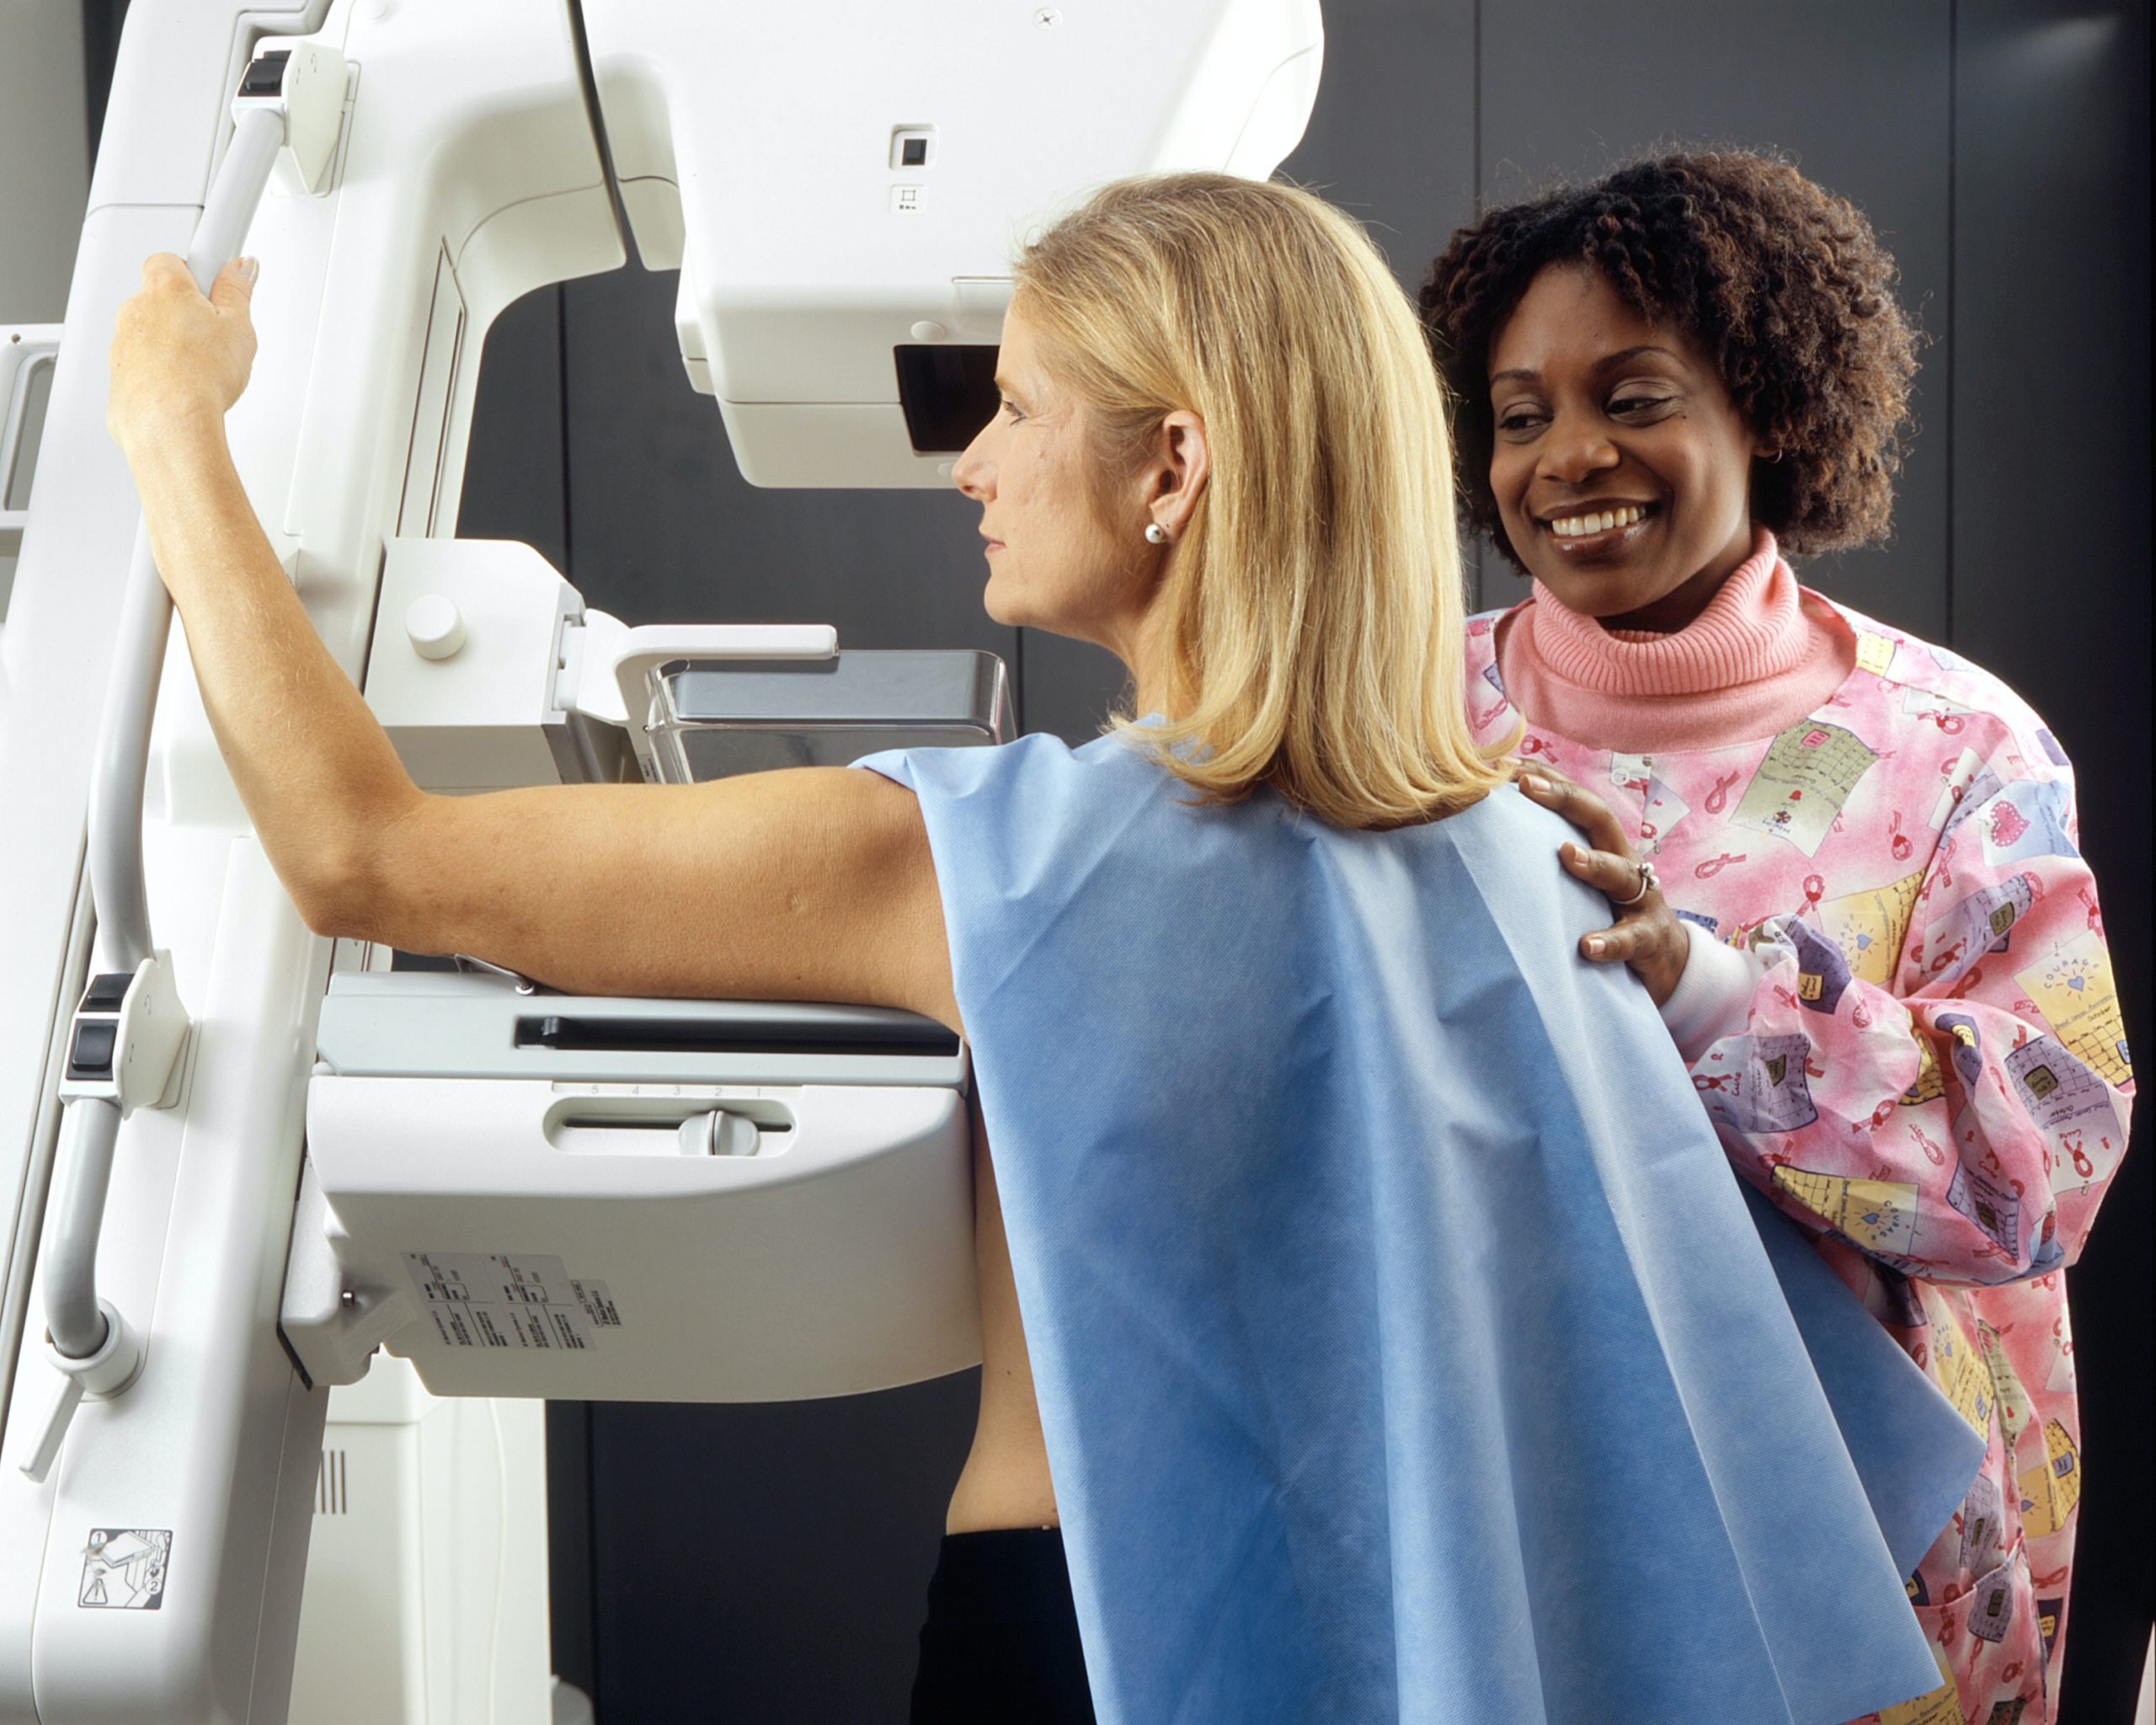 Radiation-Based Scans: How Can You Mitigate Their Affects?